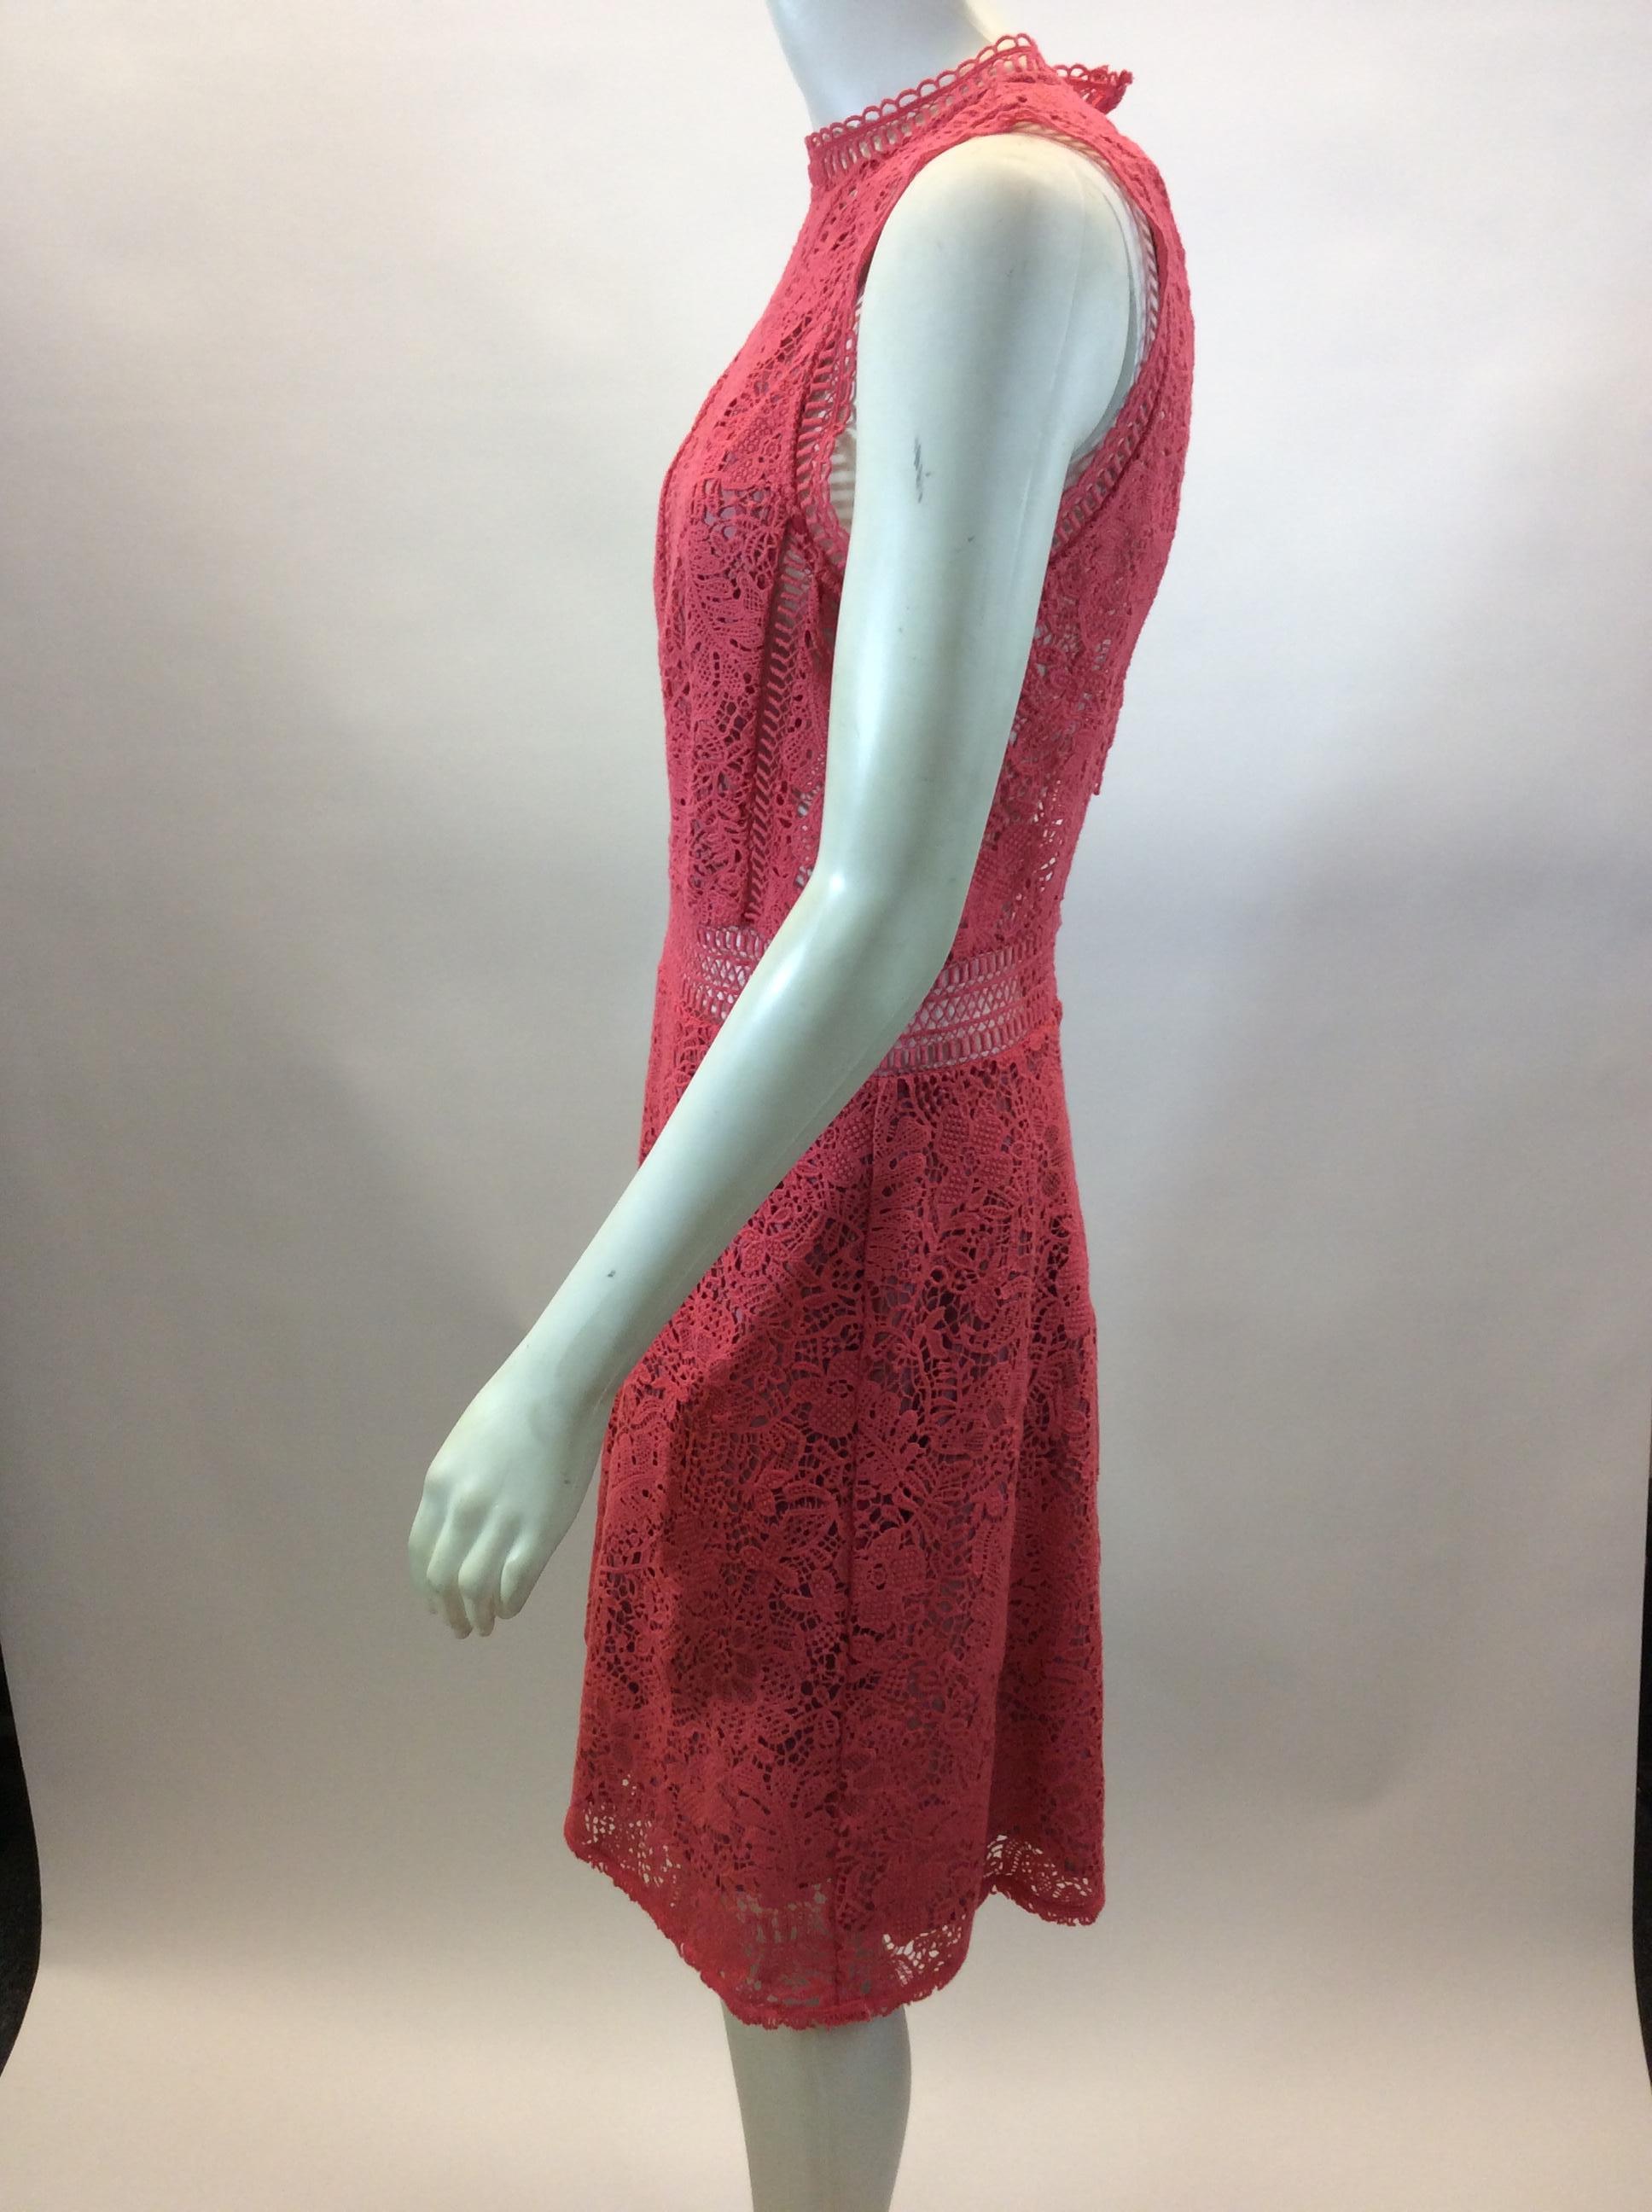 Rebecca Taylor Coral Lace Dress
$178
Made in China
100% cotton
Size 6
Length 37